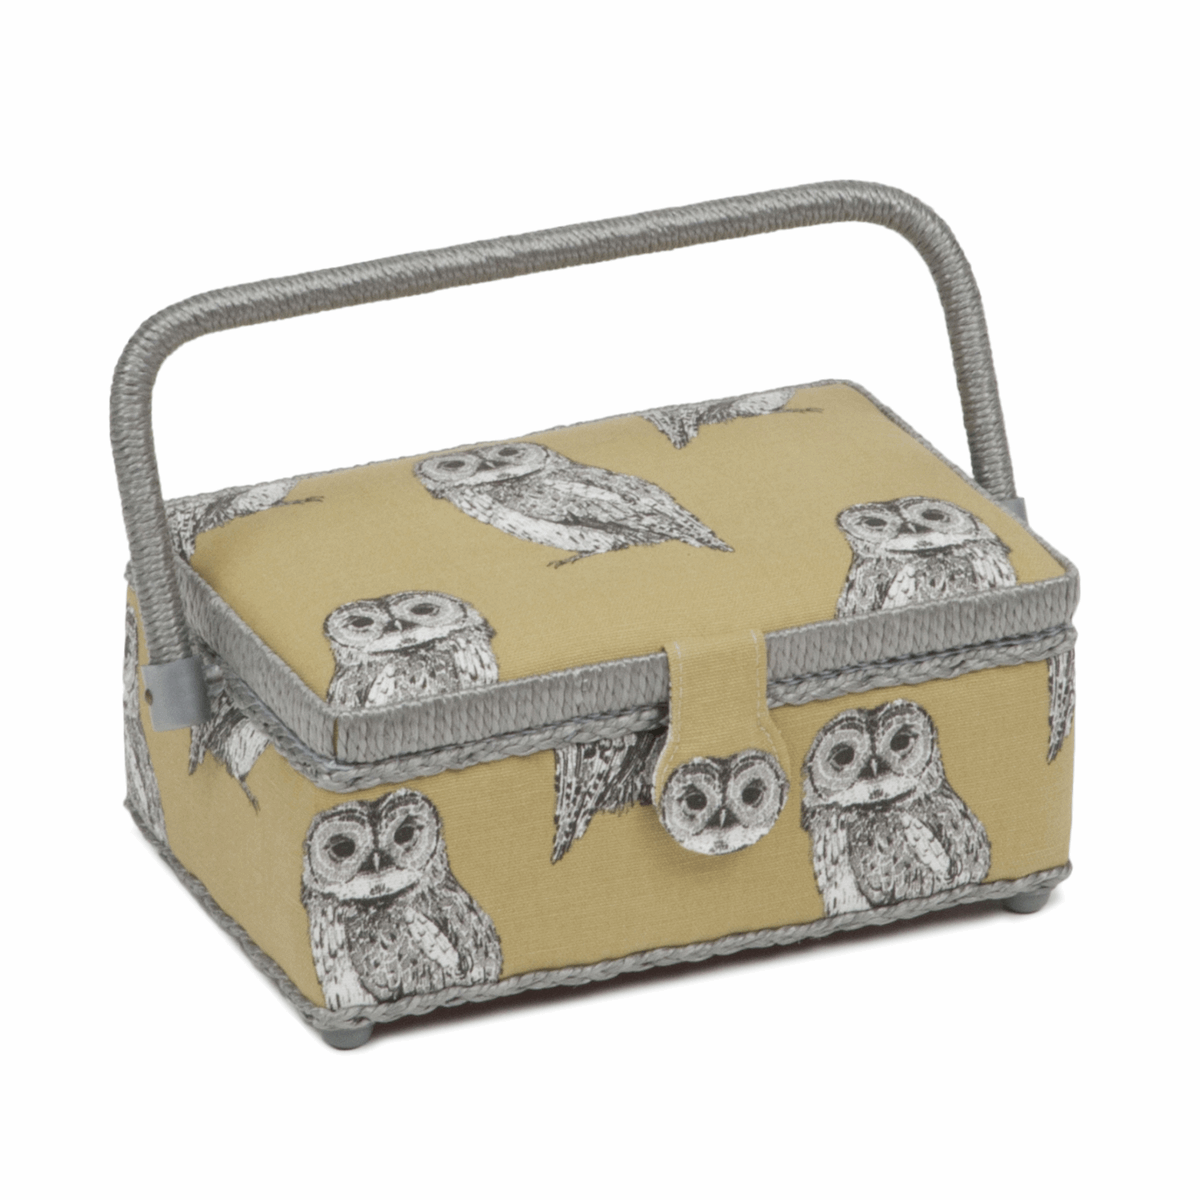 Owlet Sewing Box - Rectangle